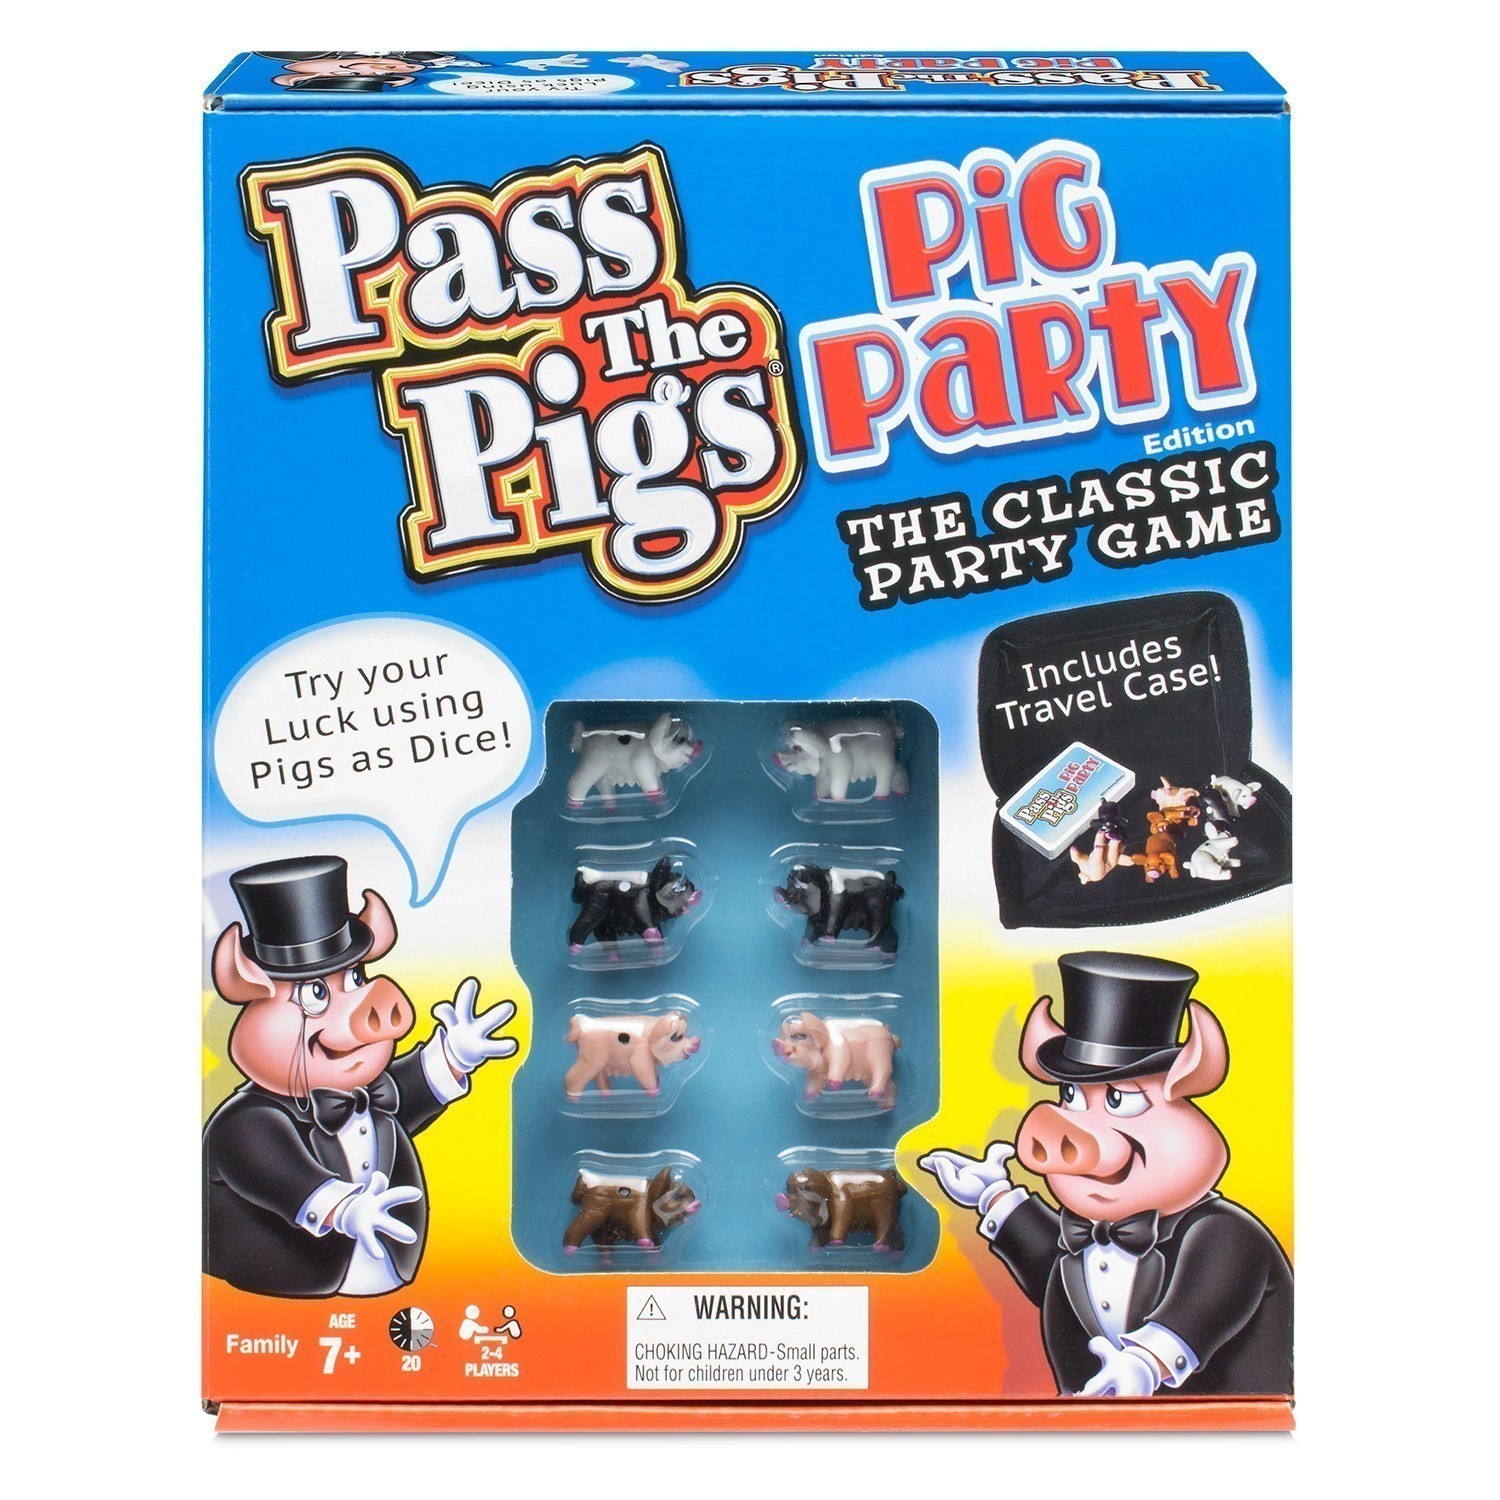 Pass The Pigs - Pig Party Edition